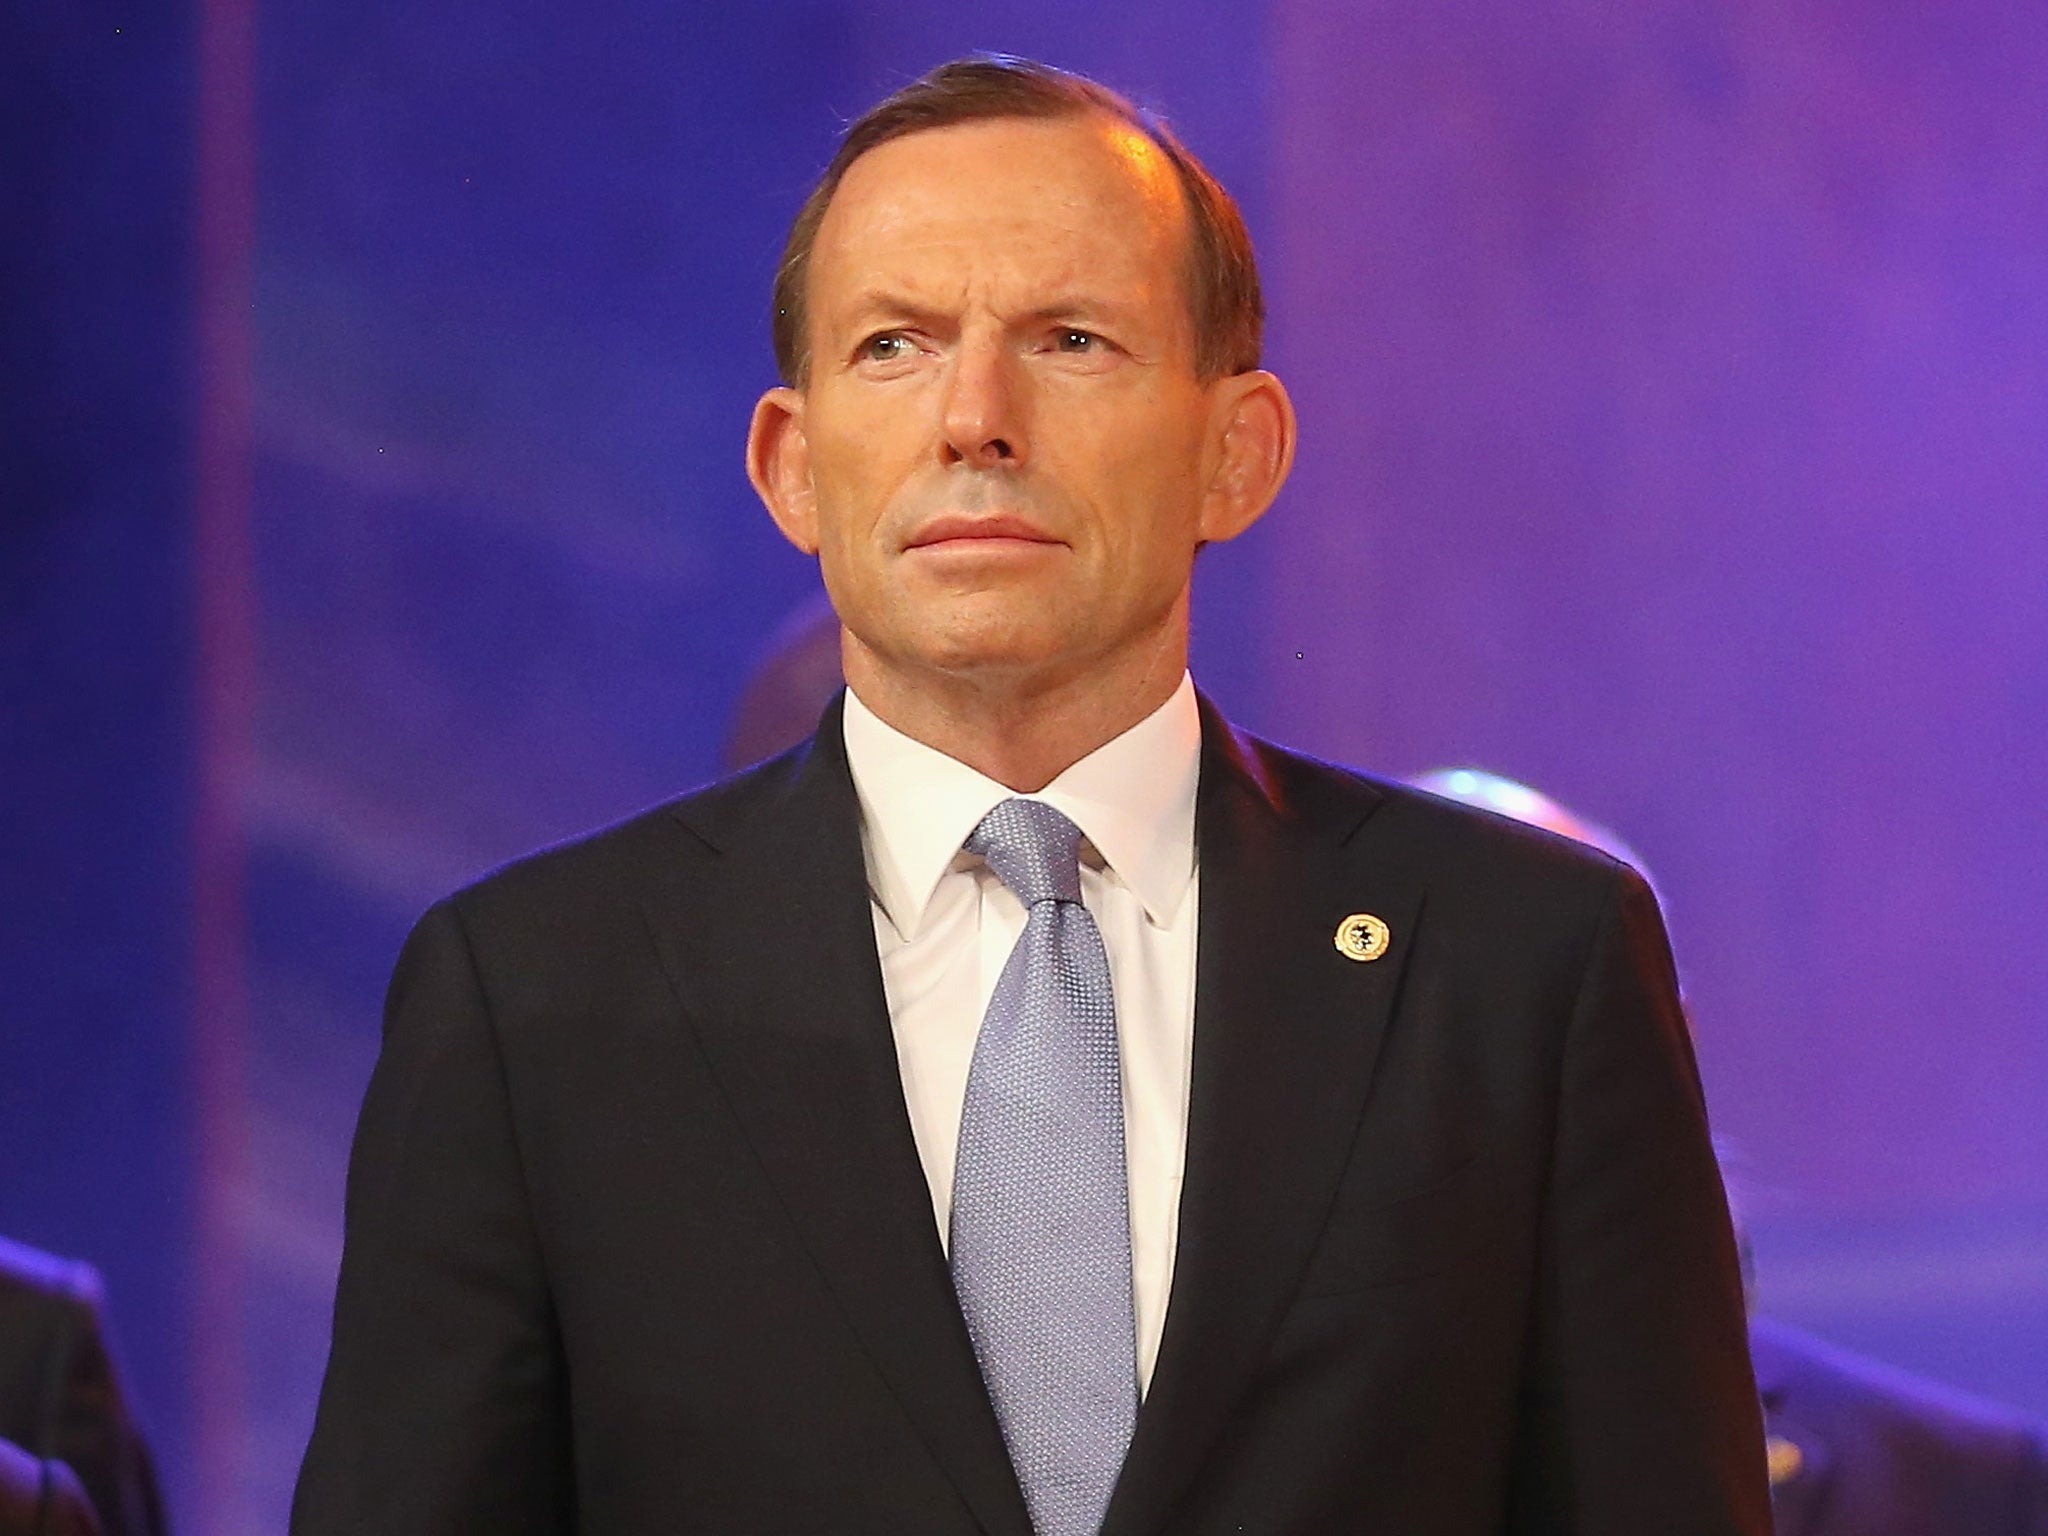 Australian Prime Minister Tony Abbott has taken a hard-line approach towards refugee policy since he was elected in September 2013.